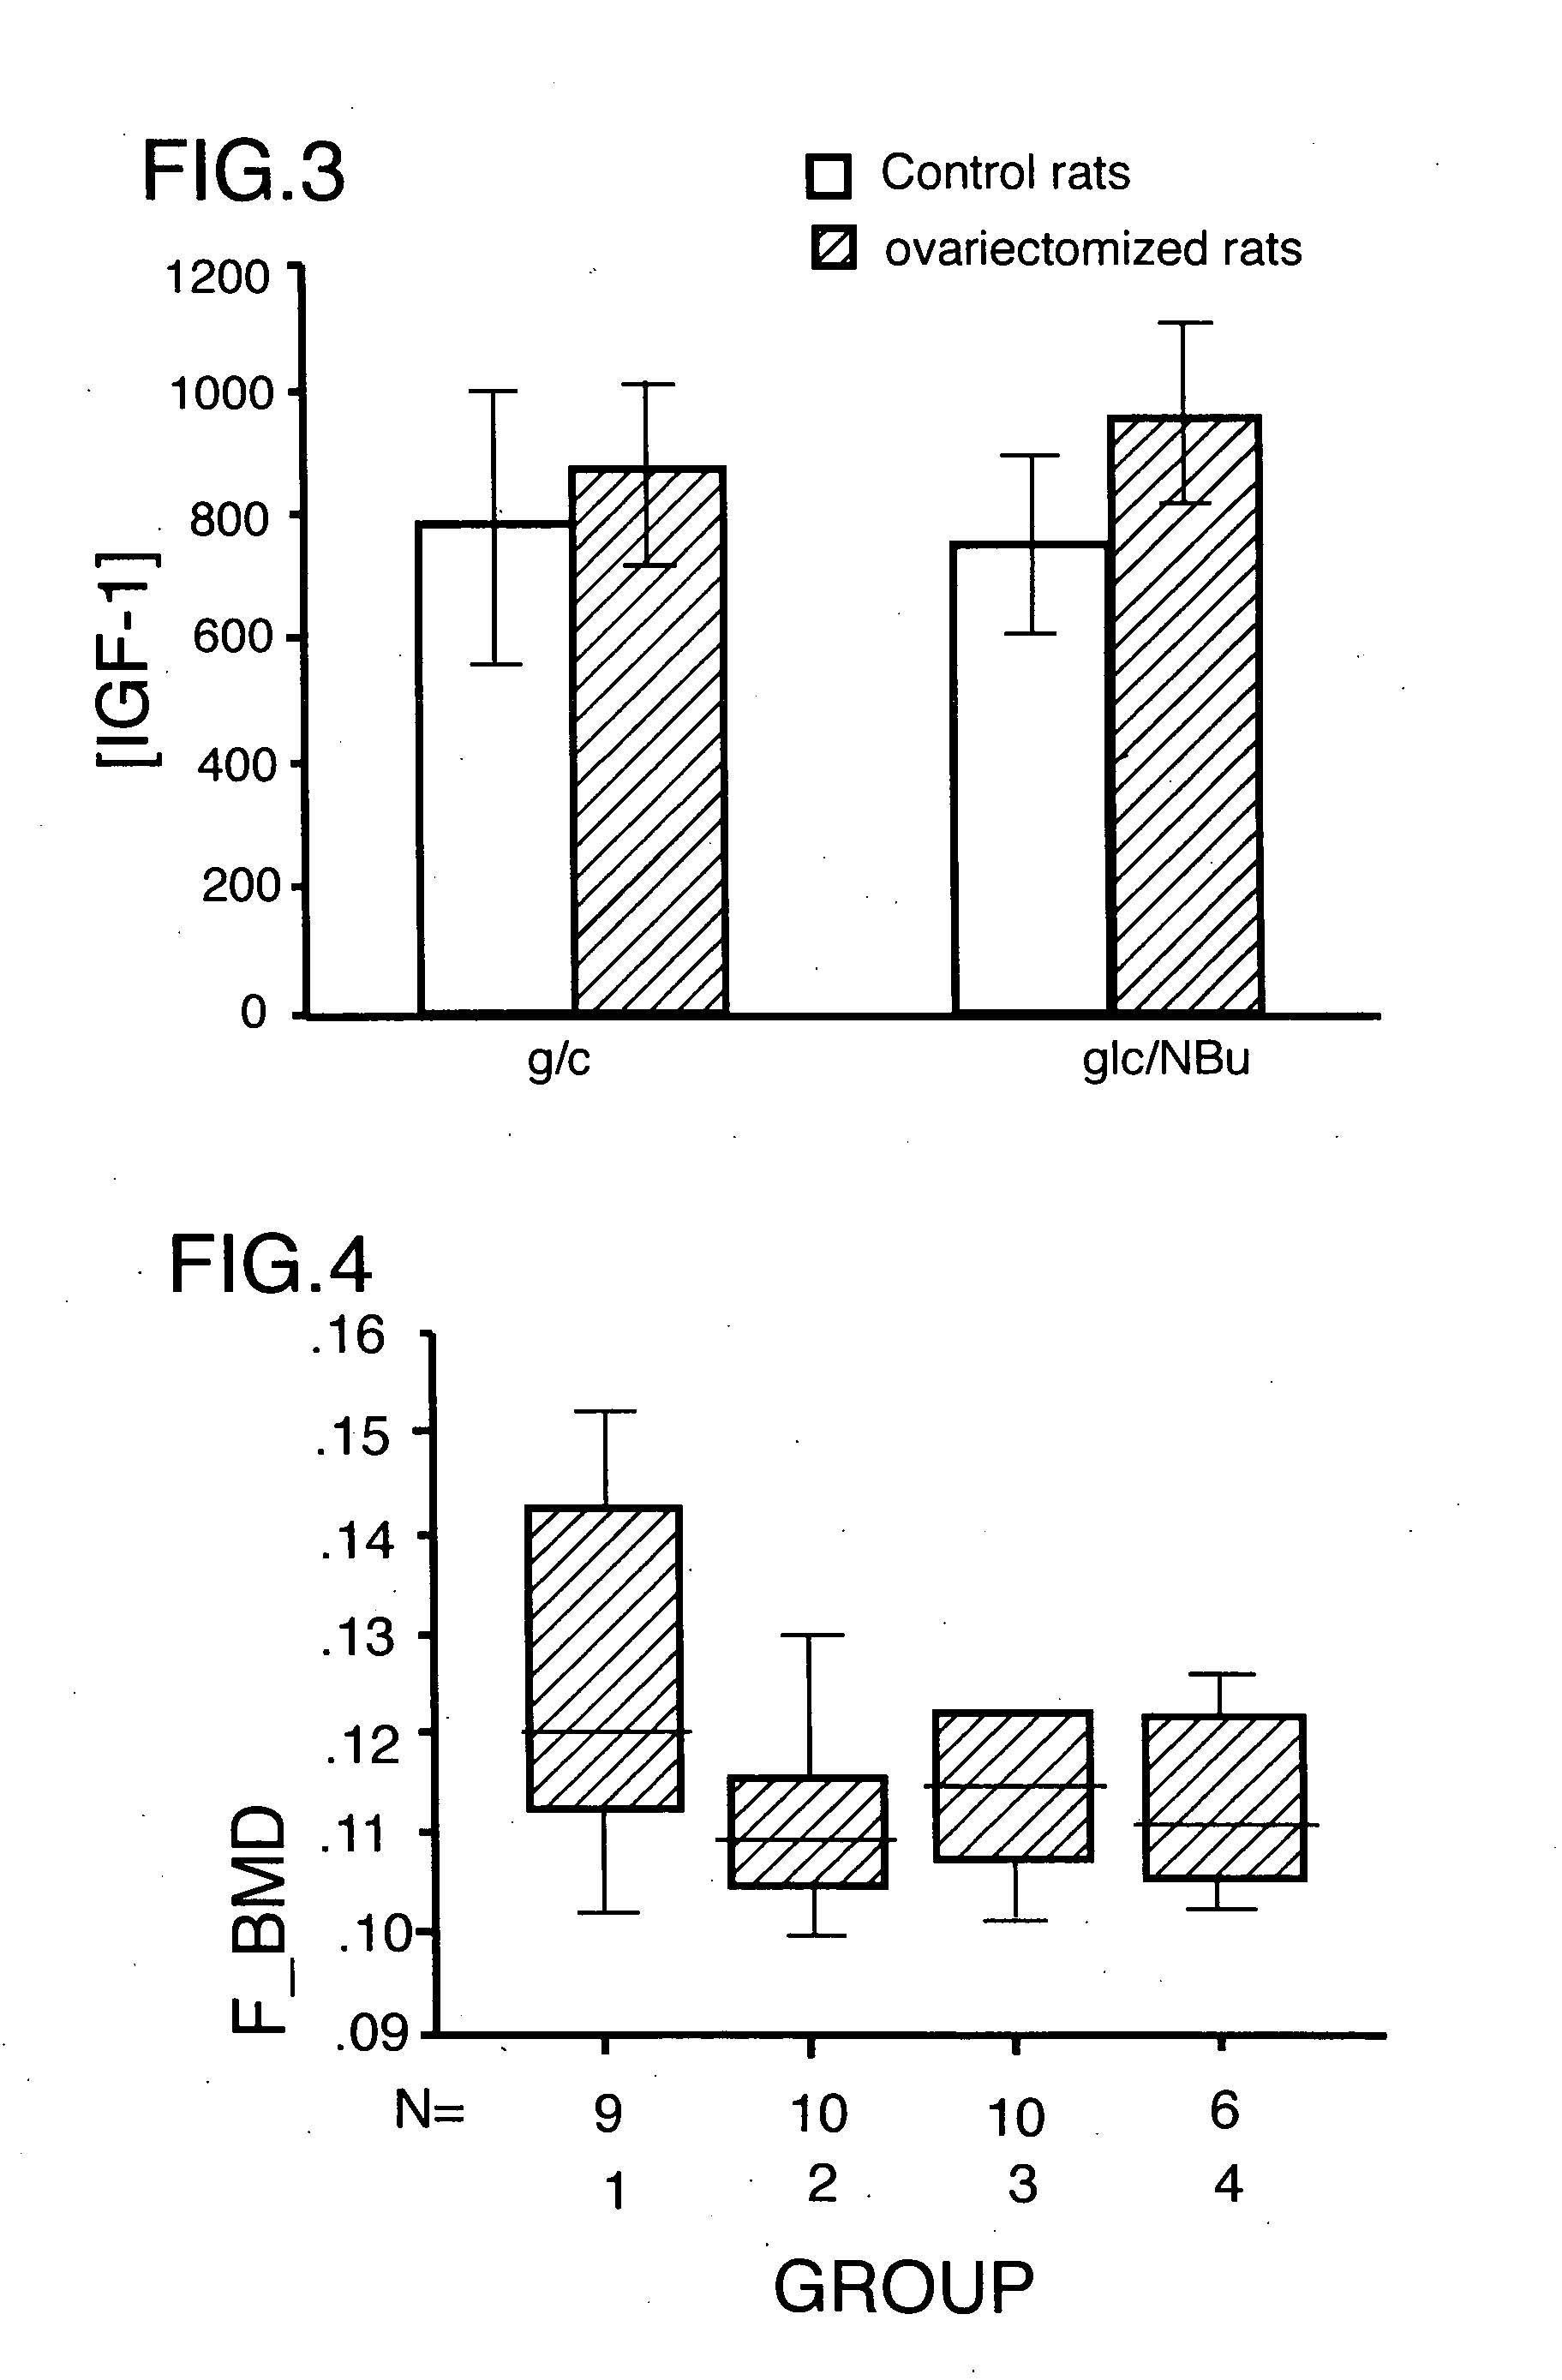 Method for increasing the bone mineral density and bone micro-architecture or connectivity of a mammal using N-acylated glucosamines